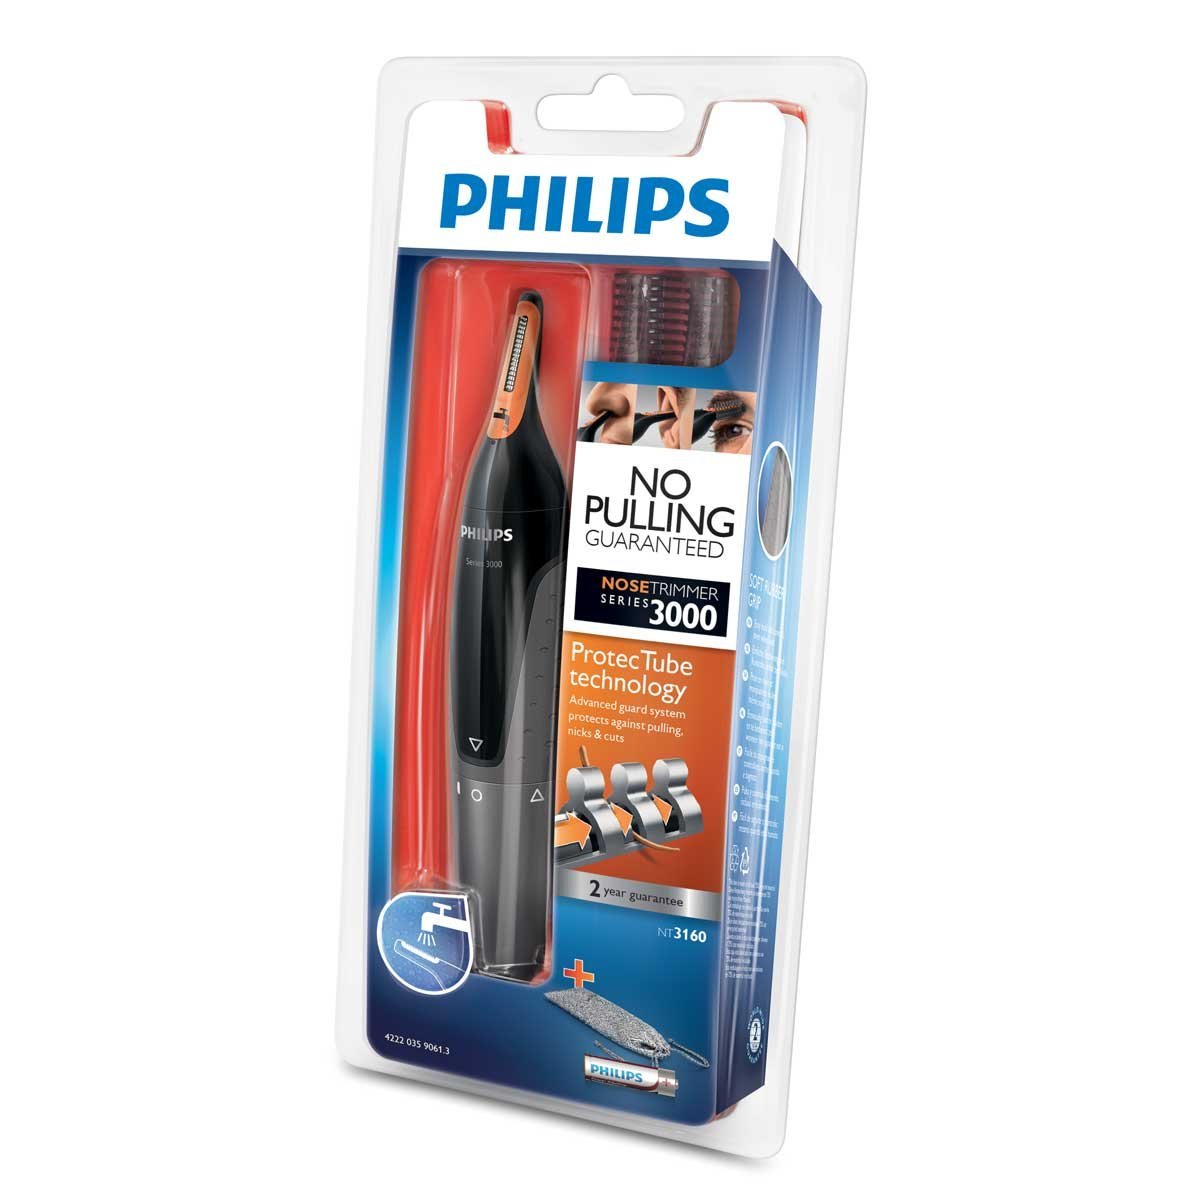 Nose Trimmer 3000 Philips